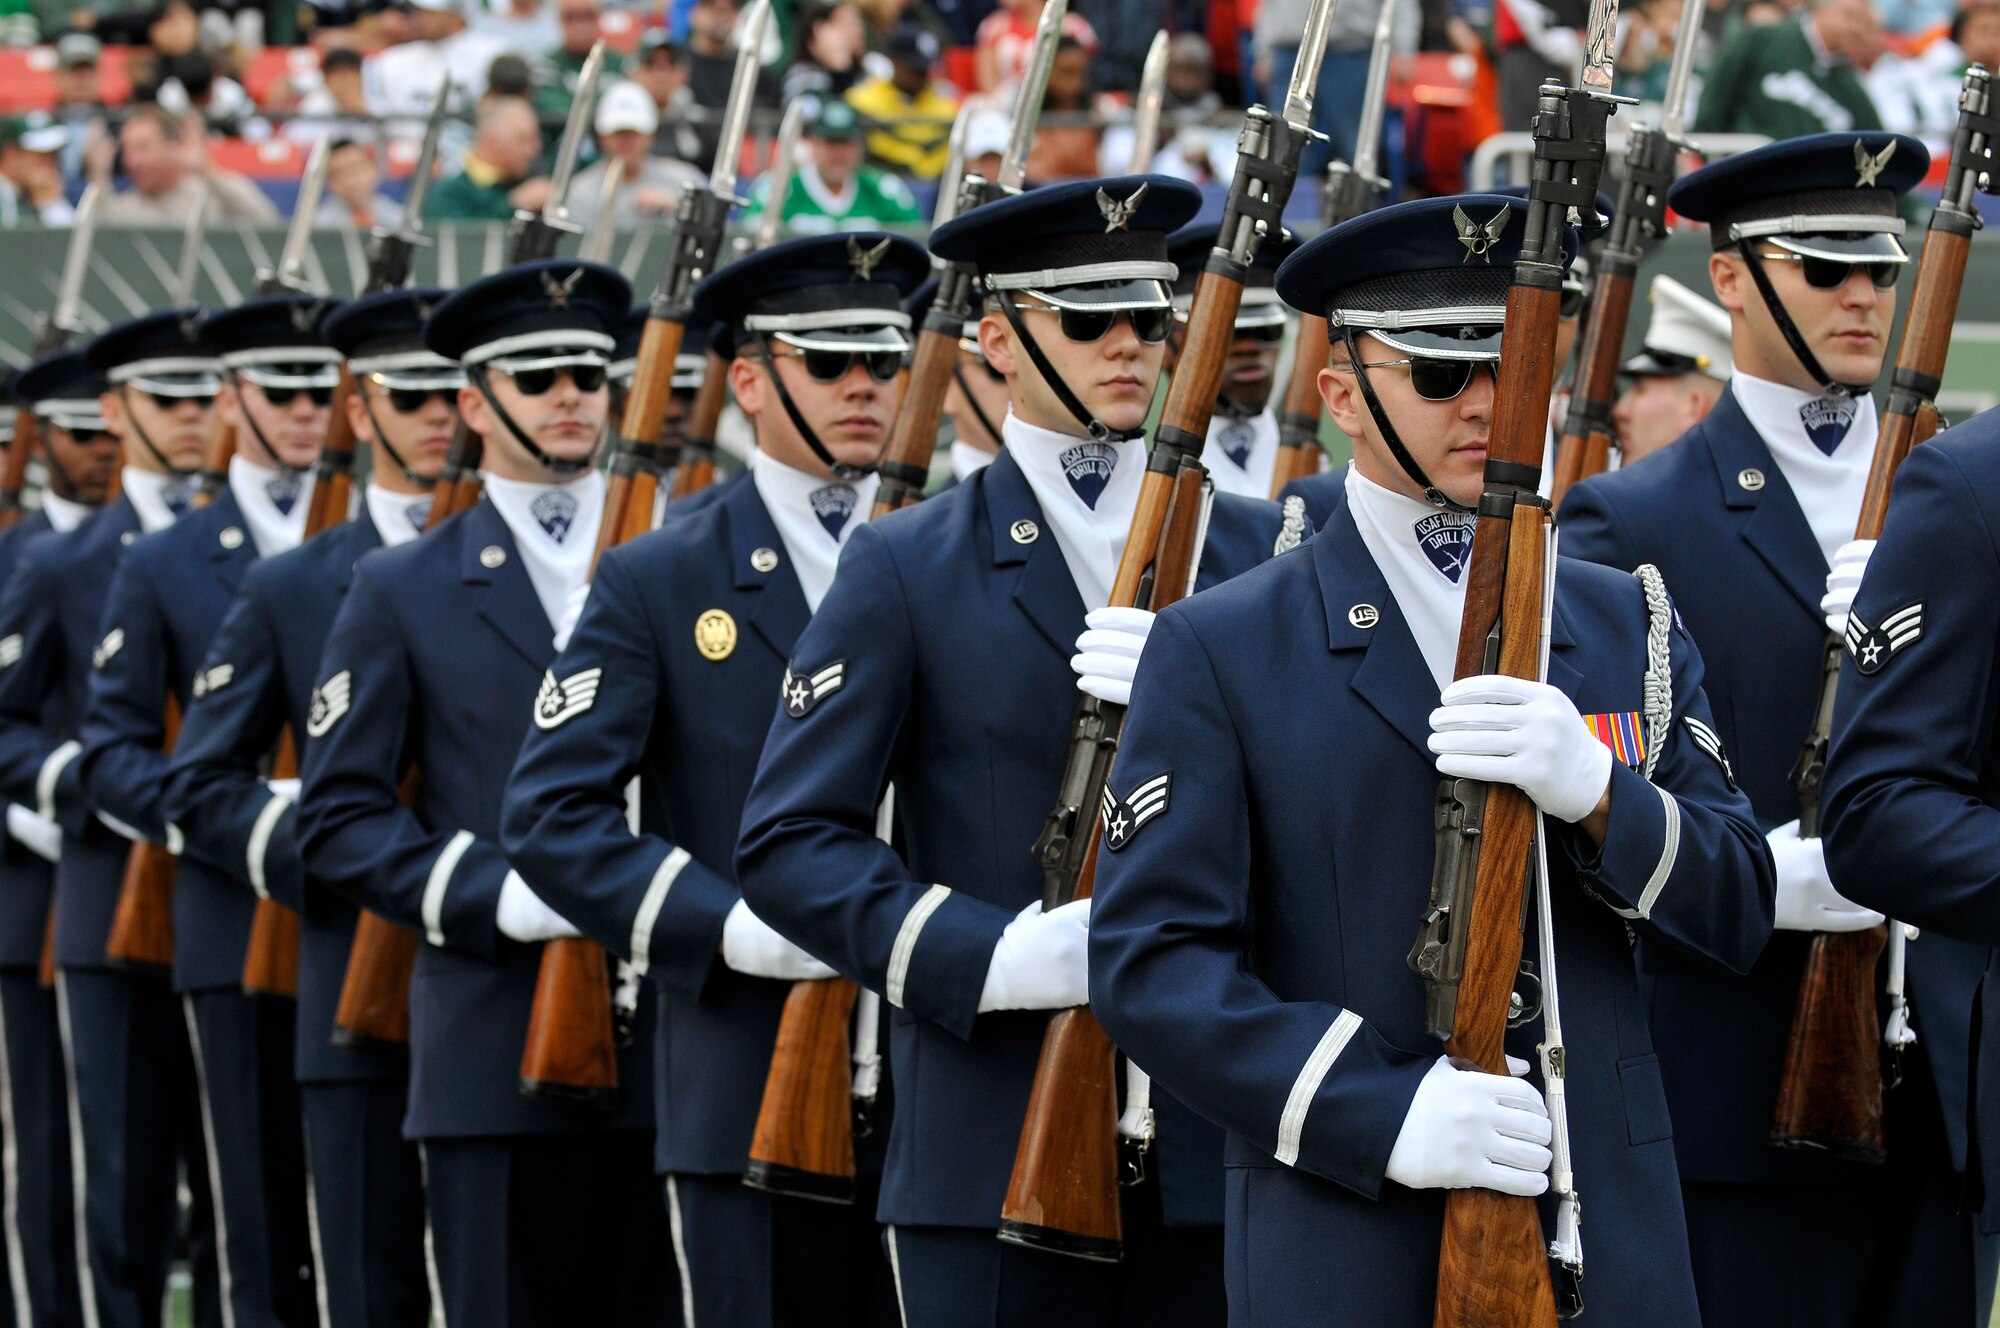 The United States Air Force Honor Guard Drill Team marches onto the field to perform during the halftime show at a New York Jets football game against the Jacksonville Jaguars at Giants Stadium Nov. 15, in East Rutherford, New Jersey. The Drill Team tours worldwide representing all Airmen while showcasing Air Force precision and professionalism. During the Air Force Honor Guard's 60-year history, their traveling component, the Drill Team, has performed in every state of the union and many countries abroad. (U.S. Air Force photo/Senior Airman Marleah Miller)